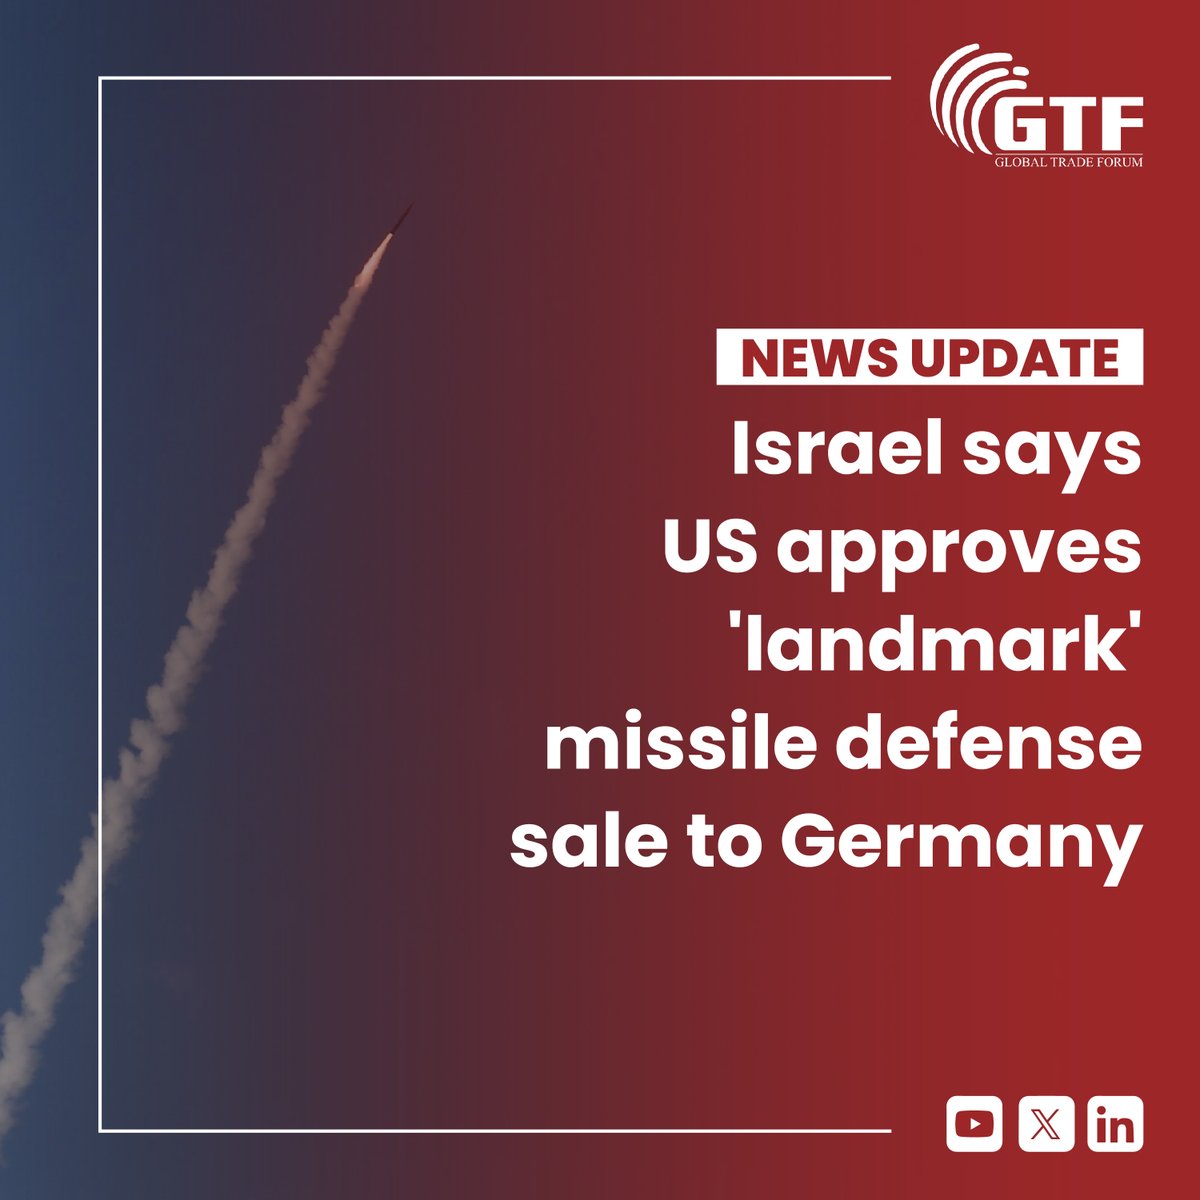 The United States has approved the sale of a 'landmark' missile defense system to Germany, Israel's Defense Minister Benny Gantz said on Thursday. 

#Israel #Germany #MissileDefense #IronDome #US #Defense #Cooperation #Iran #Proxies #Tension #Approval #gtf #globaltradeforum